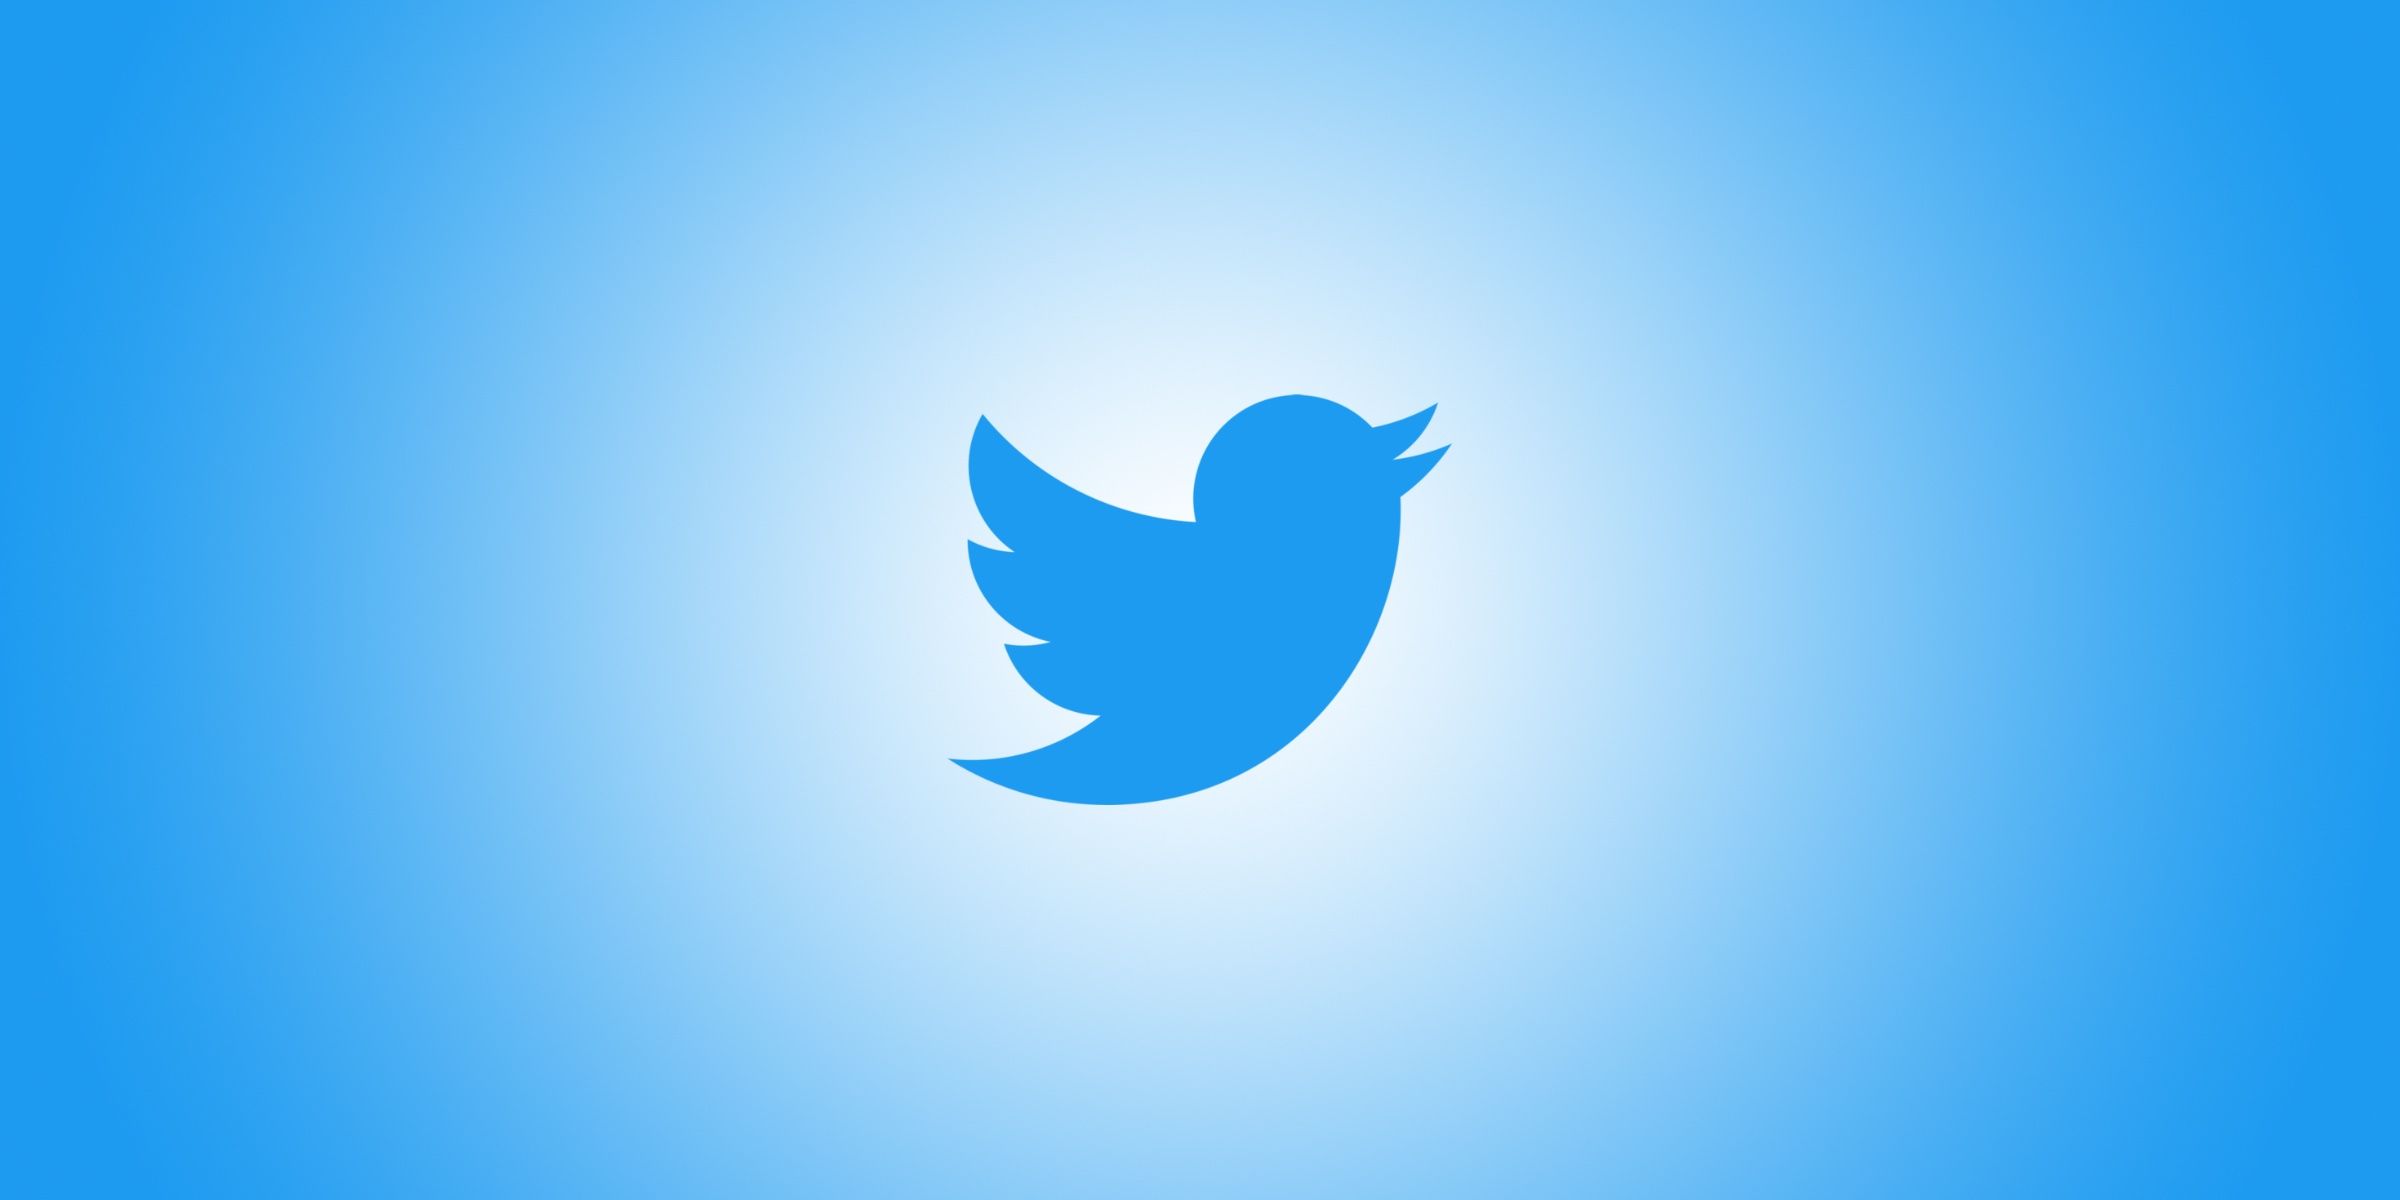 The Twitter logo against a blue background with the Spotlight effect.